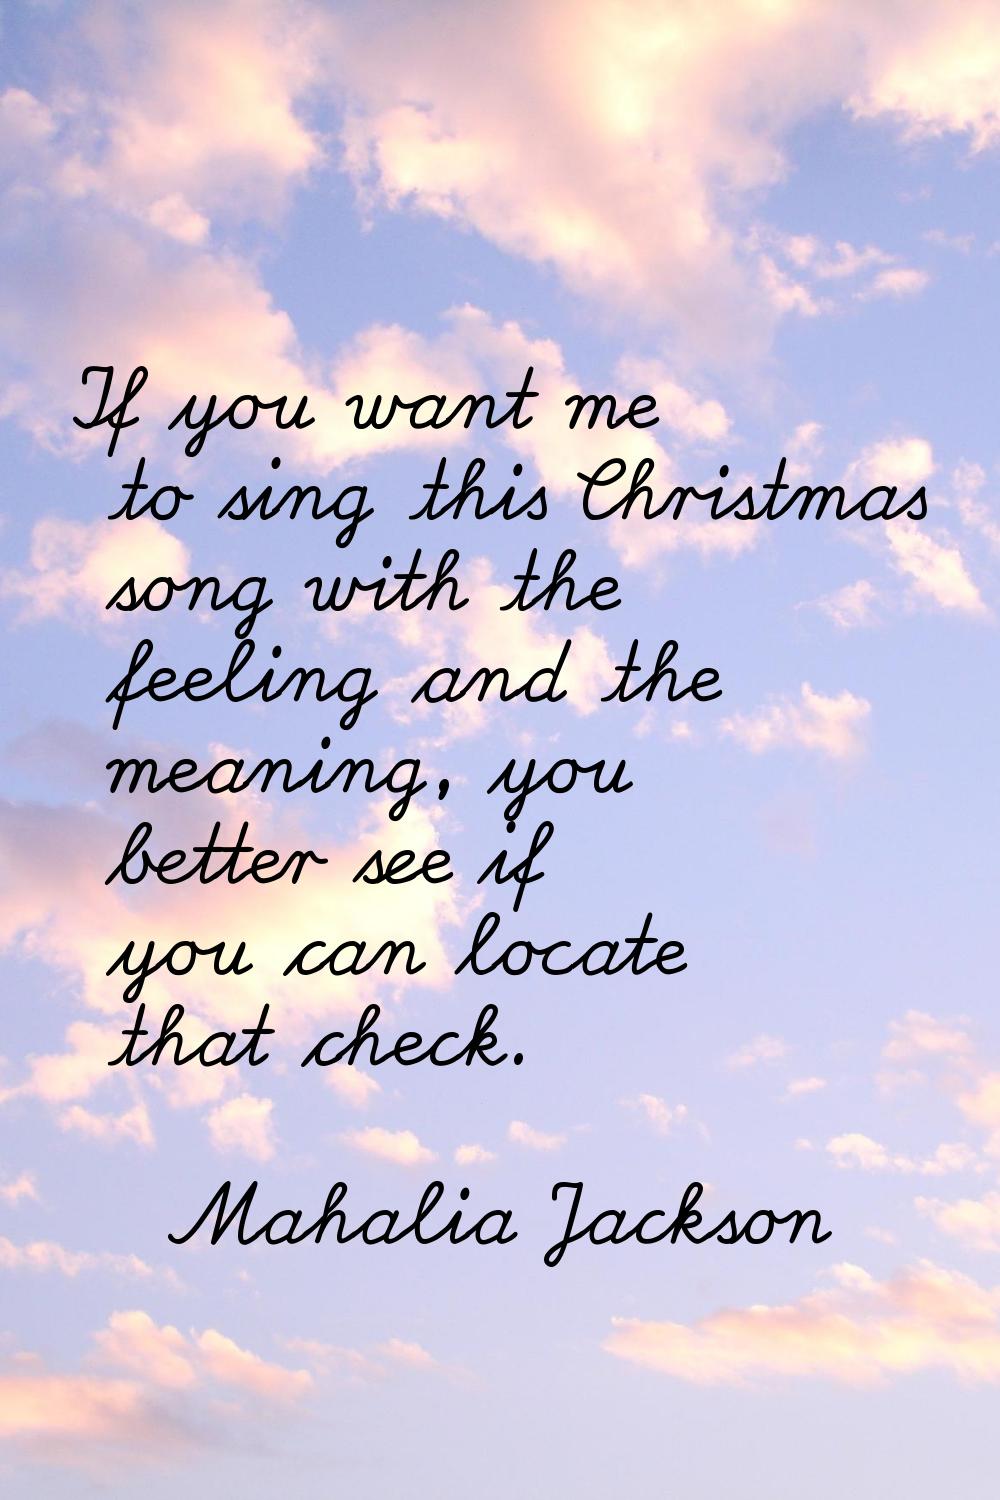 If you want me to sing this Christmas song with the feeling and the meaning, you better see if you 